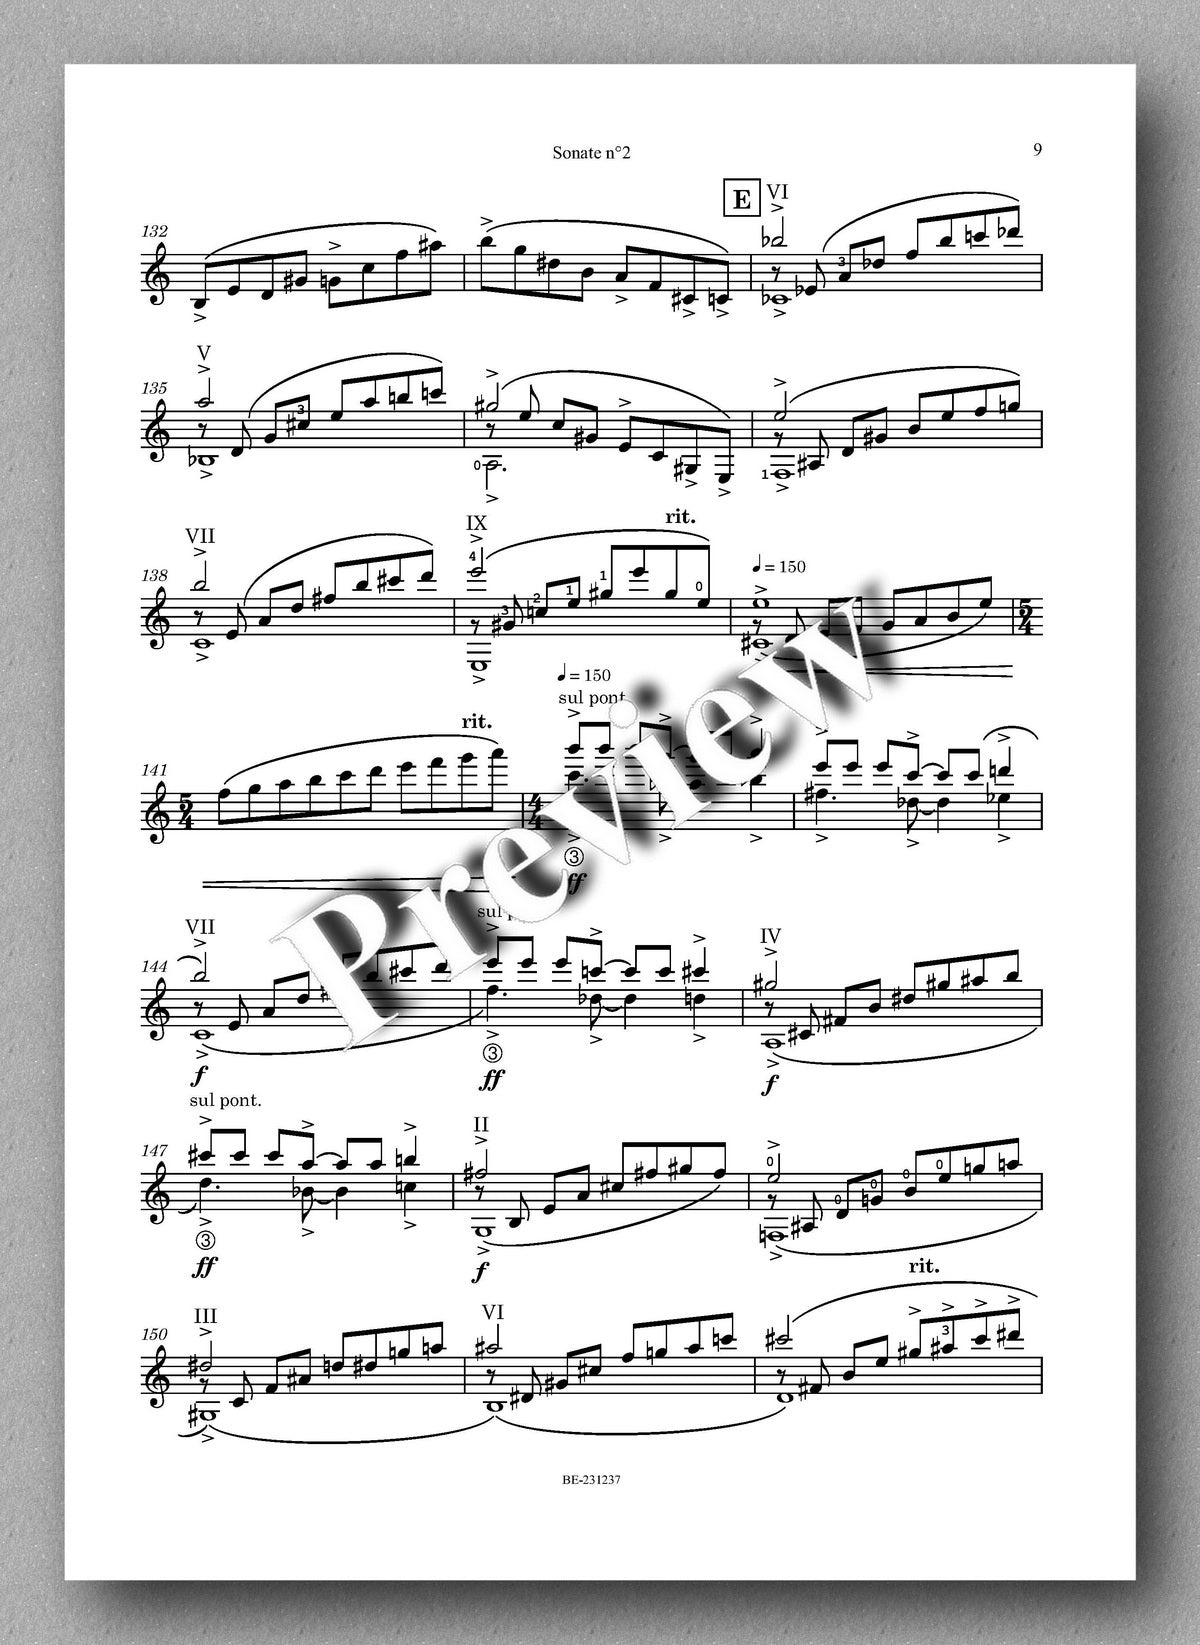 Sonate n°2 by Christian Vasseur - preview of the music score 2